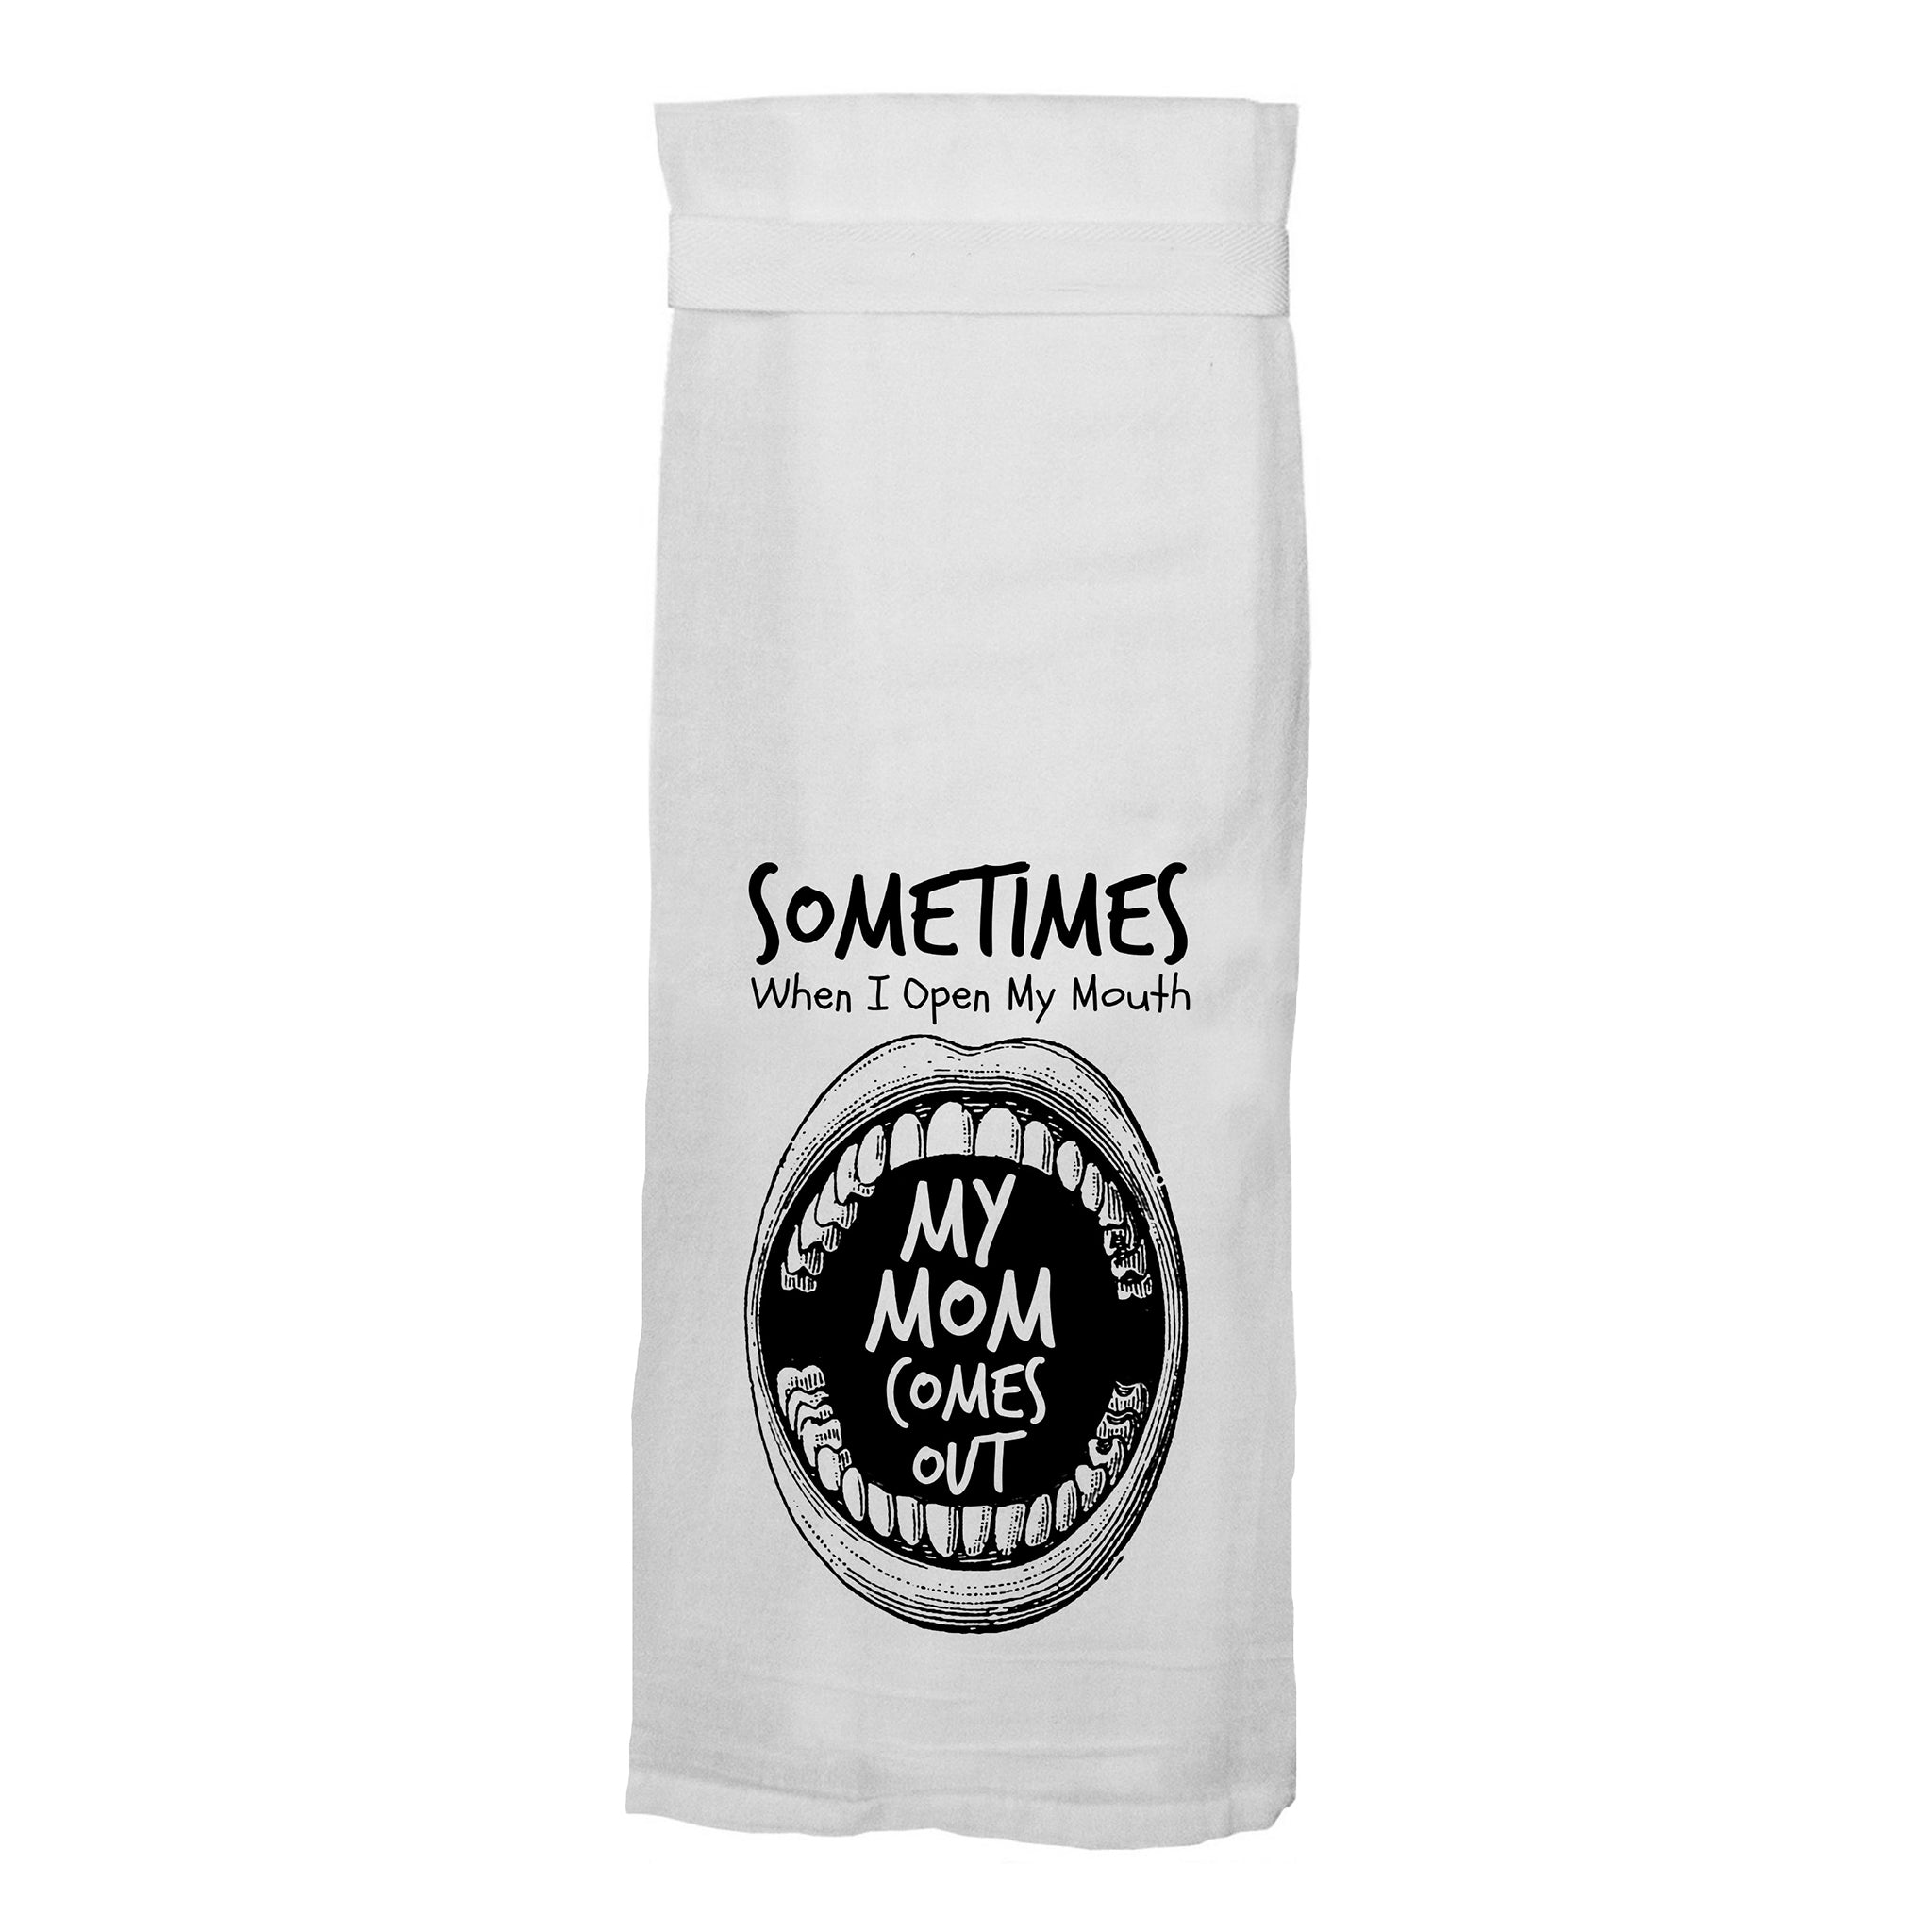 Sometimes When I Open My Mouth, My Mom Comes Out Flour Sack Hang Tight Towel - Twisted Wares®